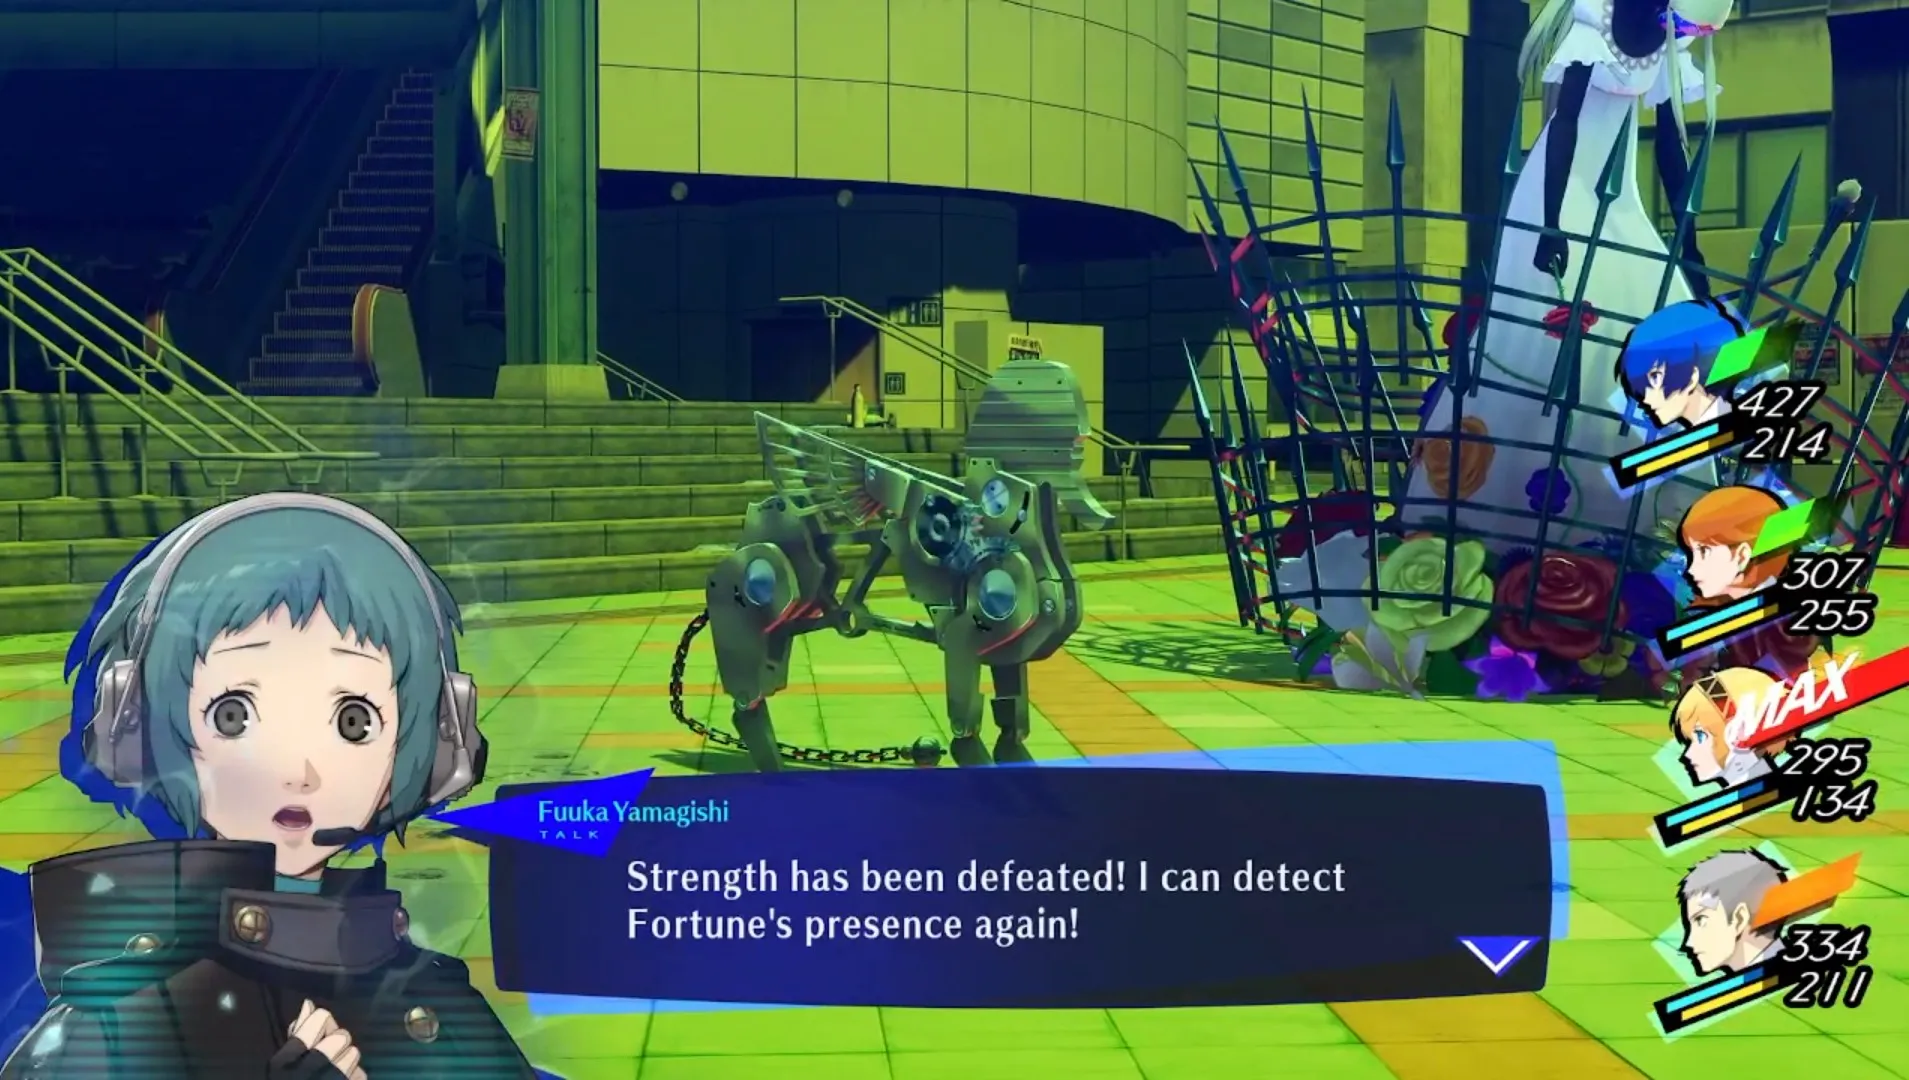 fuuka instruuets the team to attack fortune persona 3 reload p3r